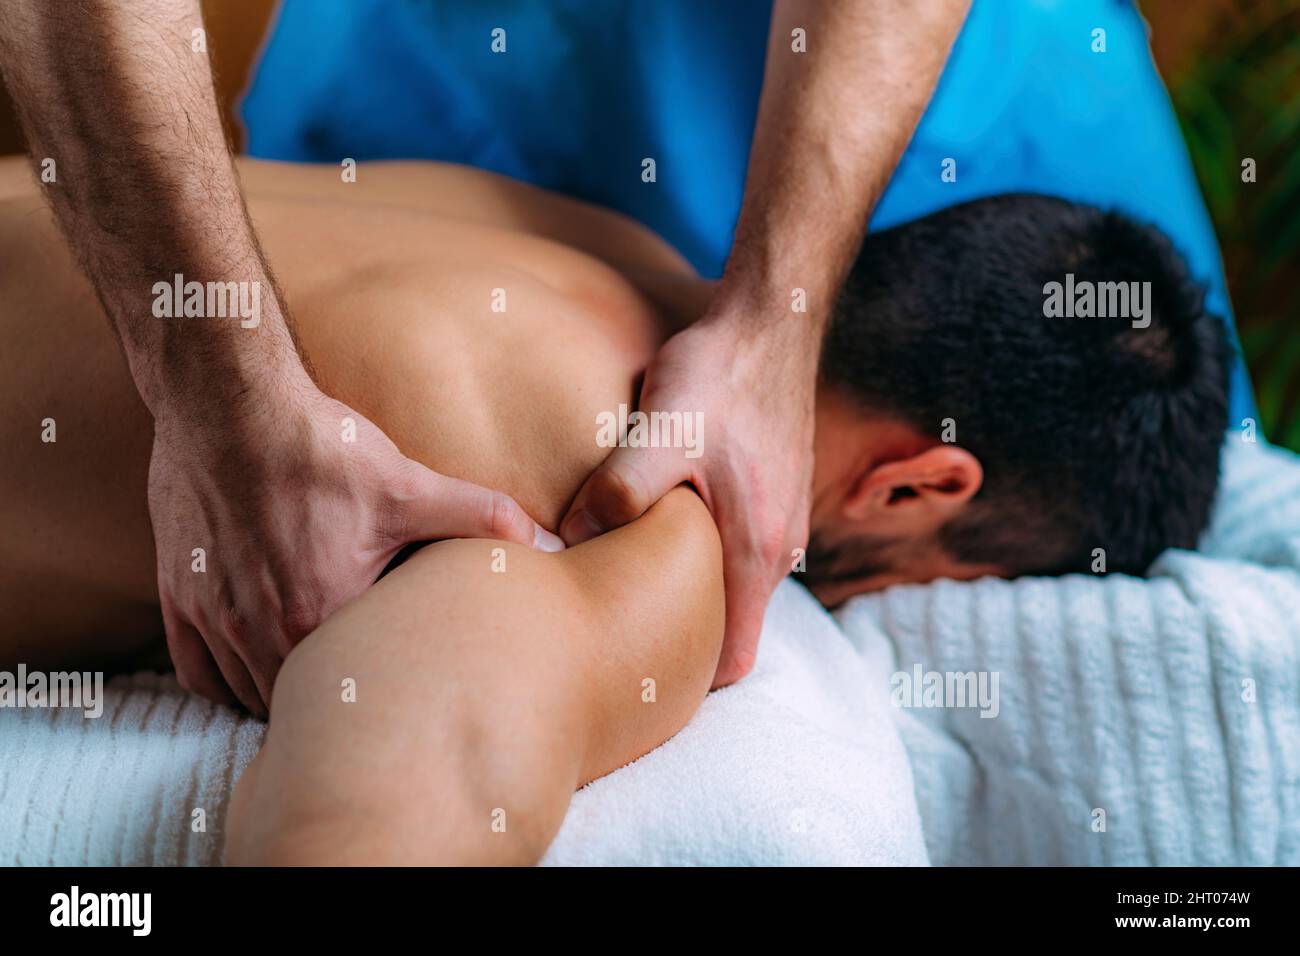 Physiotherapist massaging patient's shoulder Stock Photo